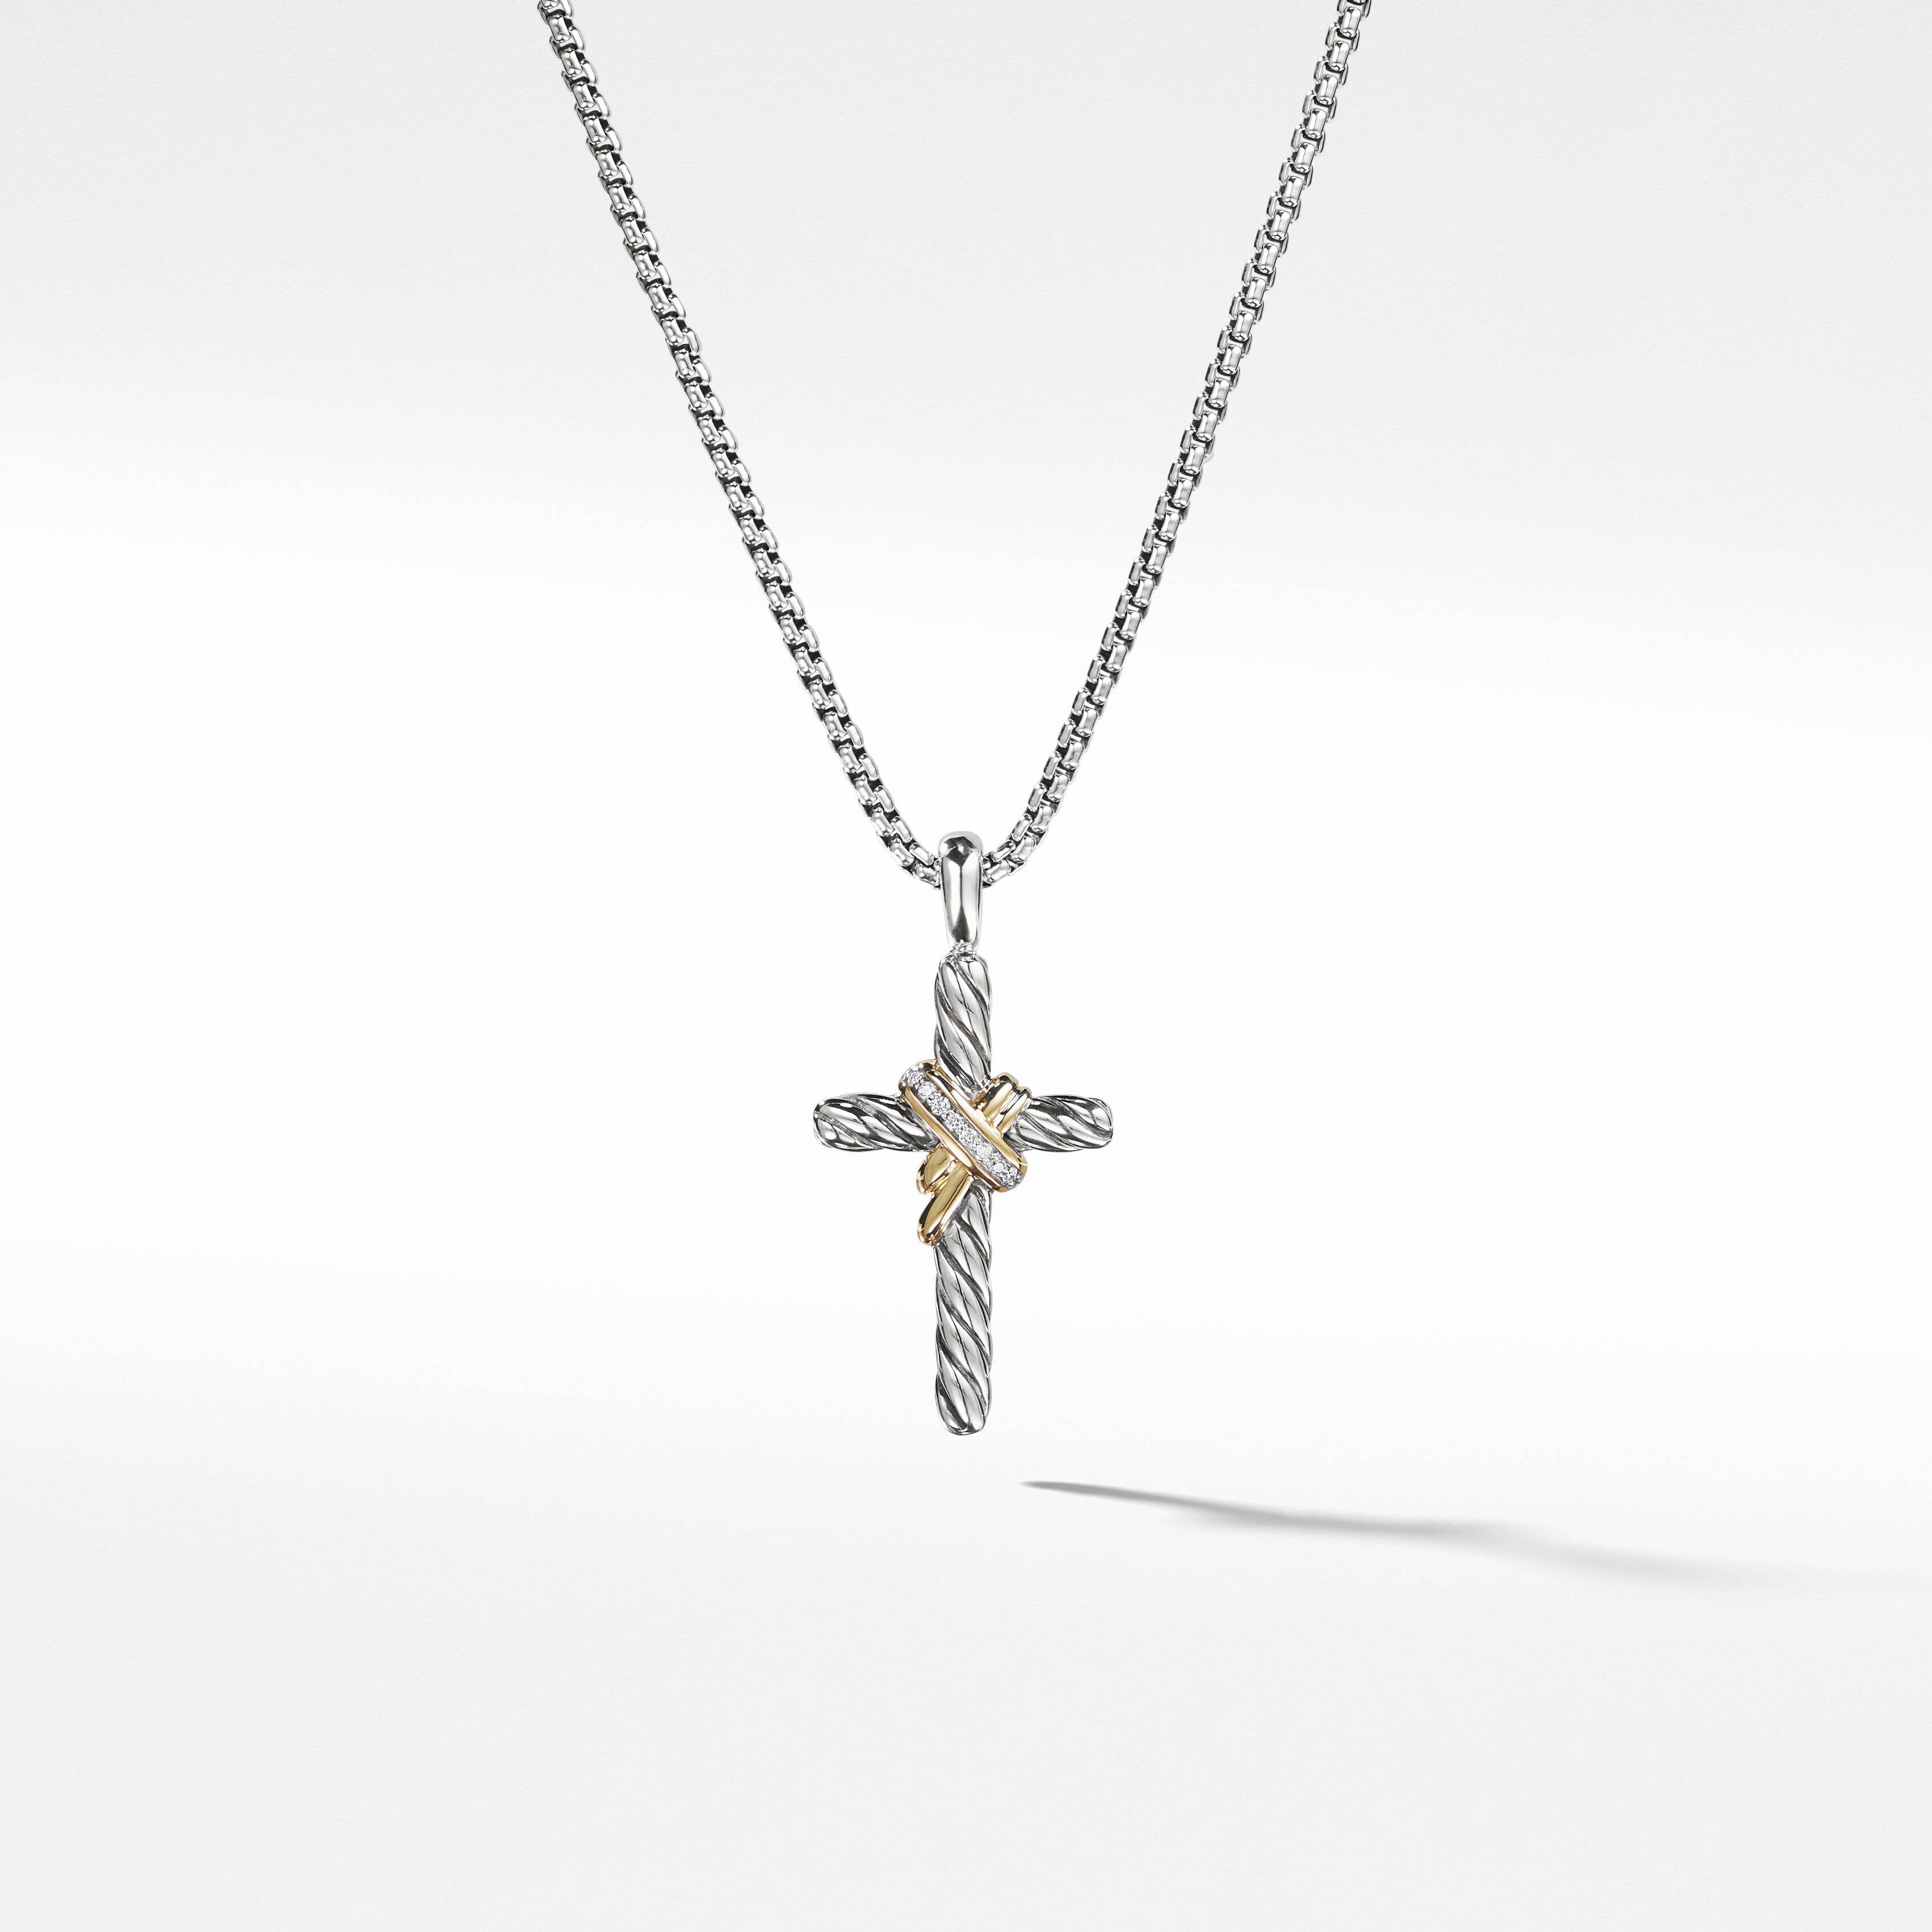 X Cross Necklace in Sterling Silver with 14K Yellow Gold and Pavé Diamonds